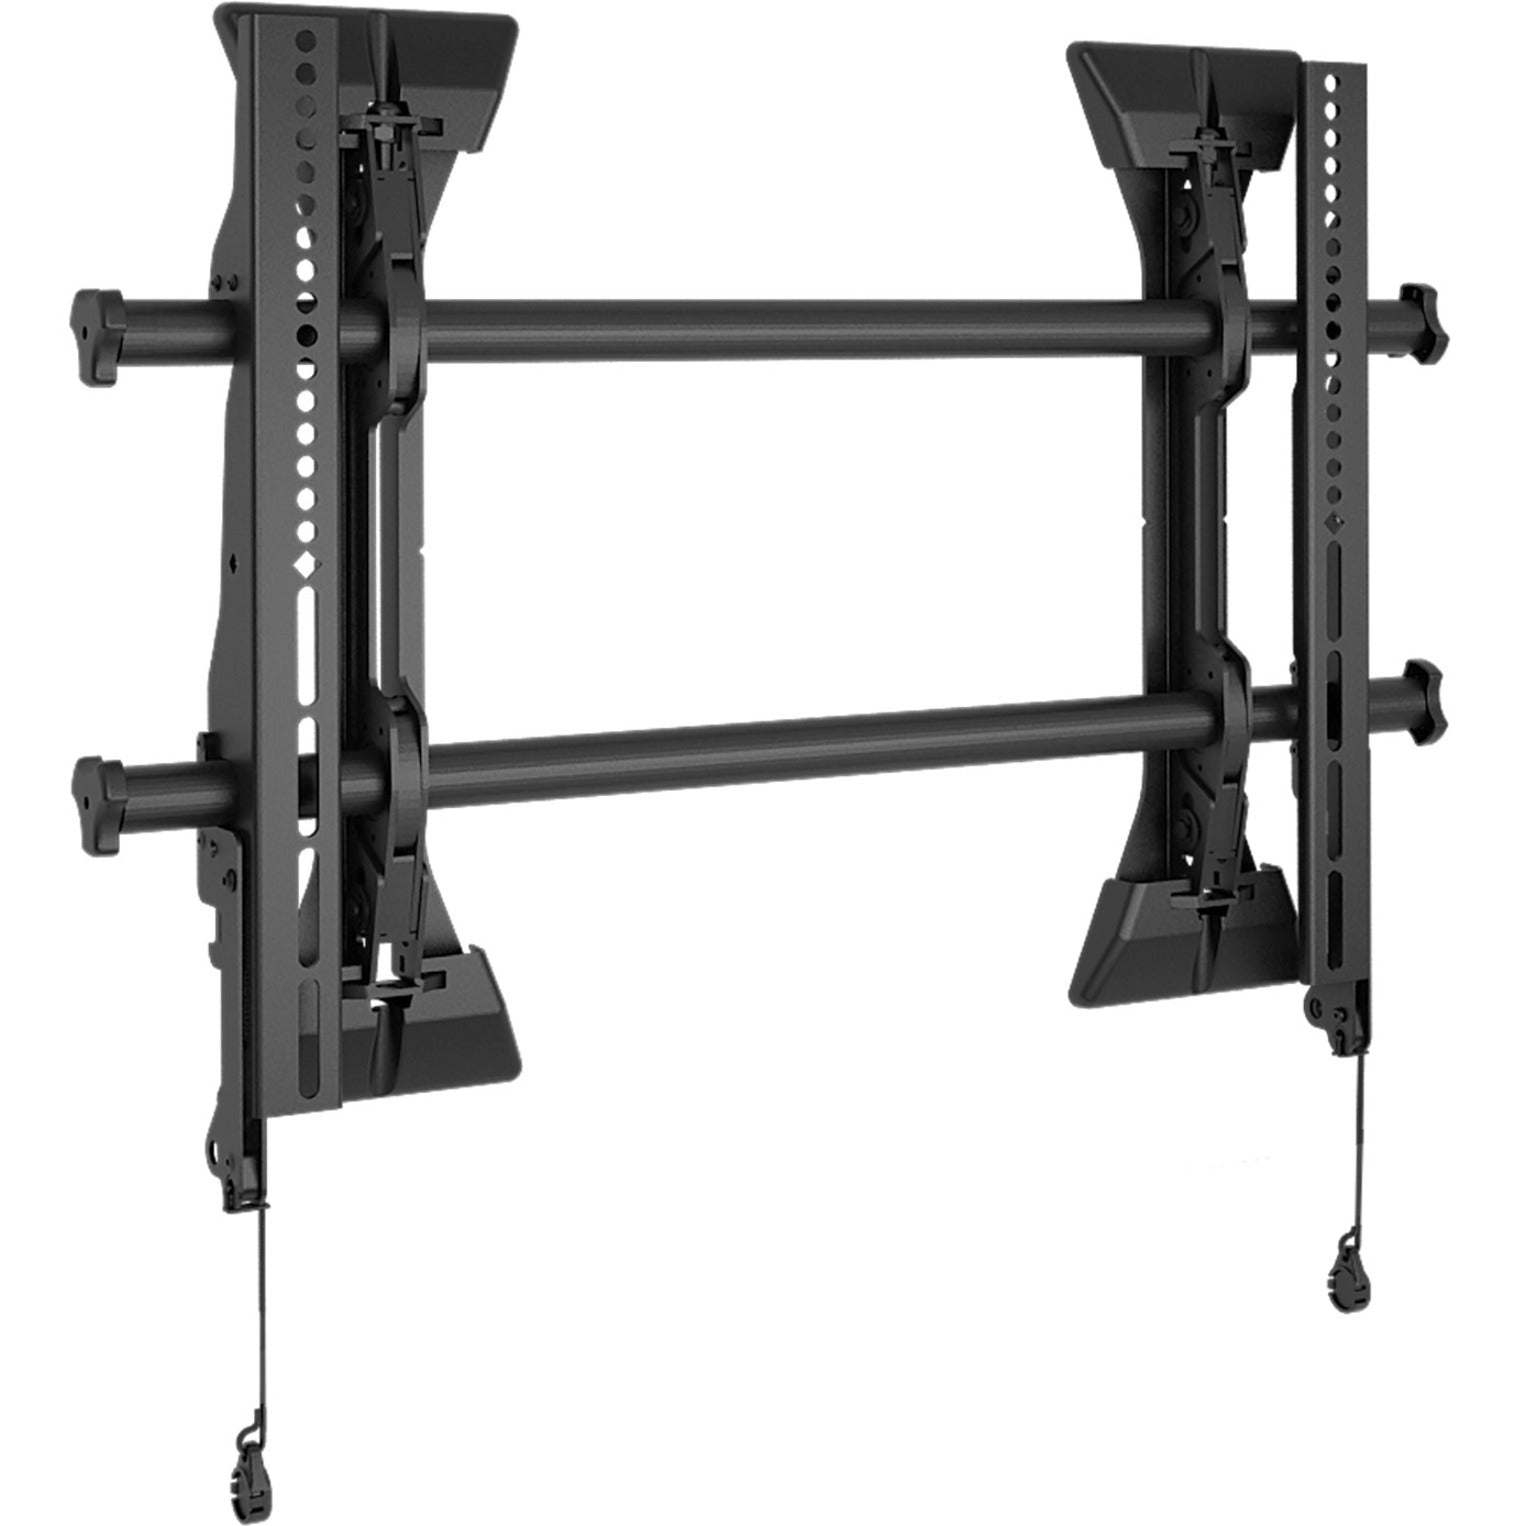 ViewSonic WMK-071 Wall Mount for Flat Panel Display, 125 lb Maximum Load Capacity, 65" Maximum Screen Size Supported